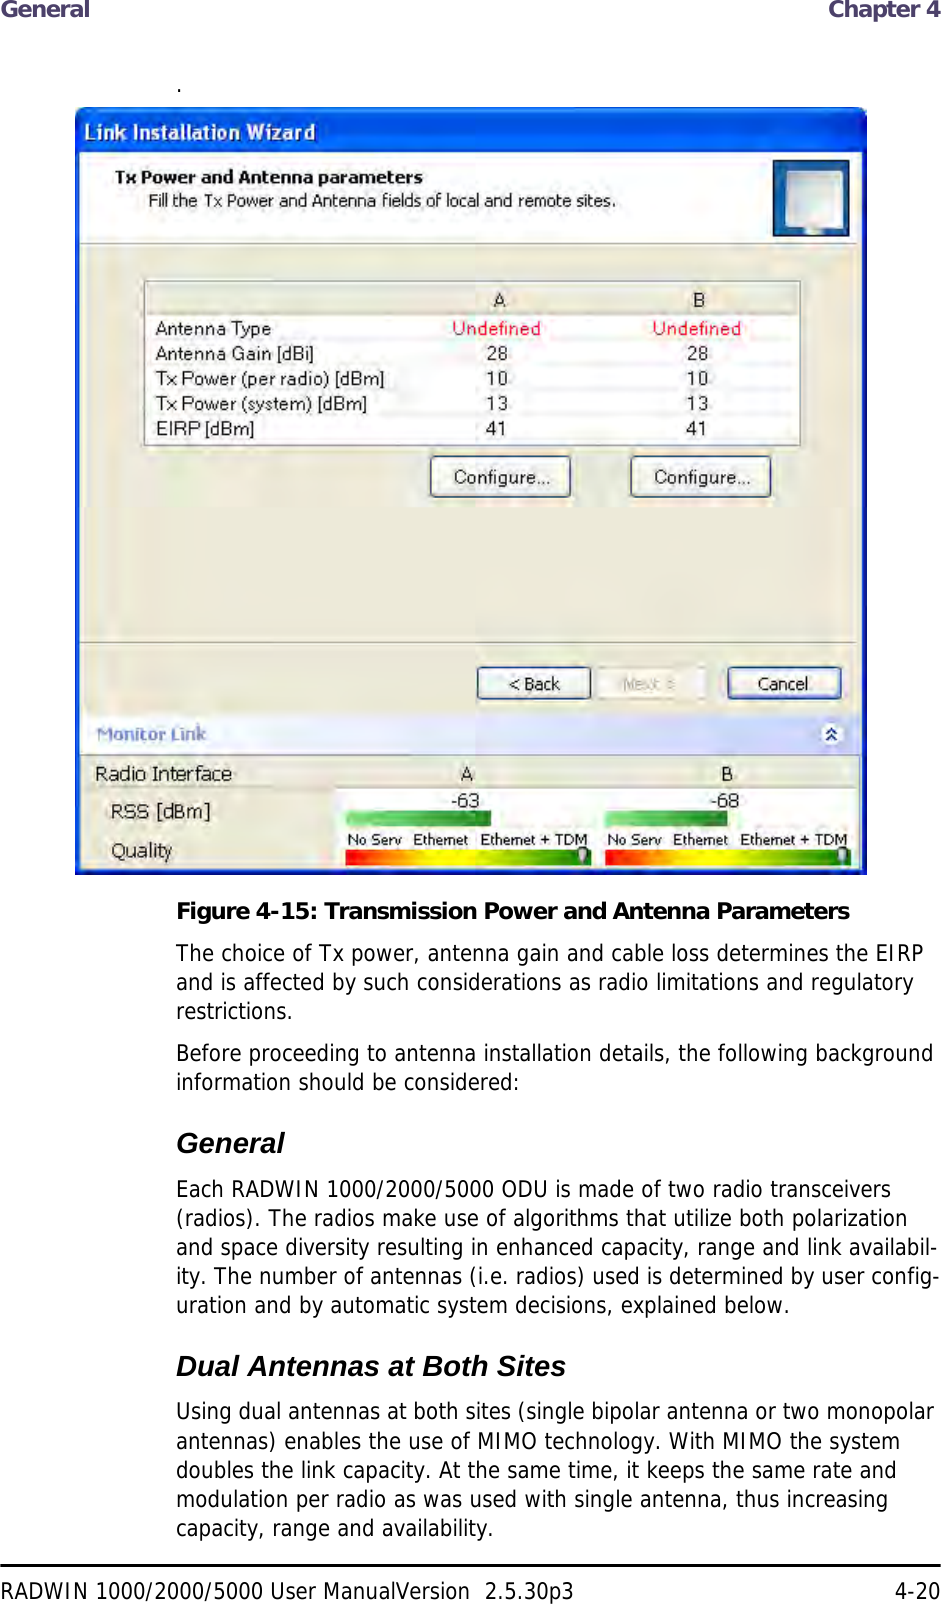 General  Chapter 4RADWIN 1000/2000/5000 User ManualVersion  2.5.30p3 4-20.Figure 4-15: Transmission Power and Antenna ParametersThe choice of Tx power, antenna gain and cable loss determines the EIRP and is affected by such considerations as radio limitations and regulatory restrictions.Before proceeding to antenna installation details, the following background information should be considered:GeneralEach RADWIN 1000/2000/5000 ODU is made of two radio transceivers (radios). The radios make use of algorithms that utilize both polarization and space diversity resulting in enhanced capacity, range and link availabil-ity. The number of antennas (i.e. radios) used is determined by user config-uration and by automatic system decisions, explained below. Dual Antennas at Both SitesUsing dual antennas at both sites (single bipolar antenna or two monopolar antennas) enables the use of MIMO technology. With MIMO the system doubles the link capacity. At the same time, it keeps the same rate and modulation per radio as was used with single antenna, thus increasing capacity, range and availability.